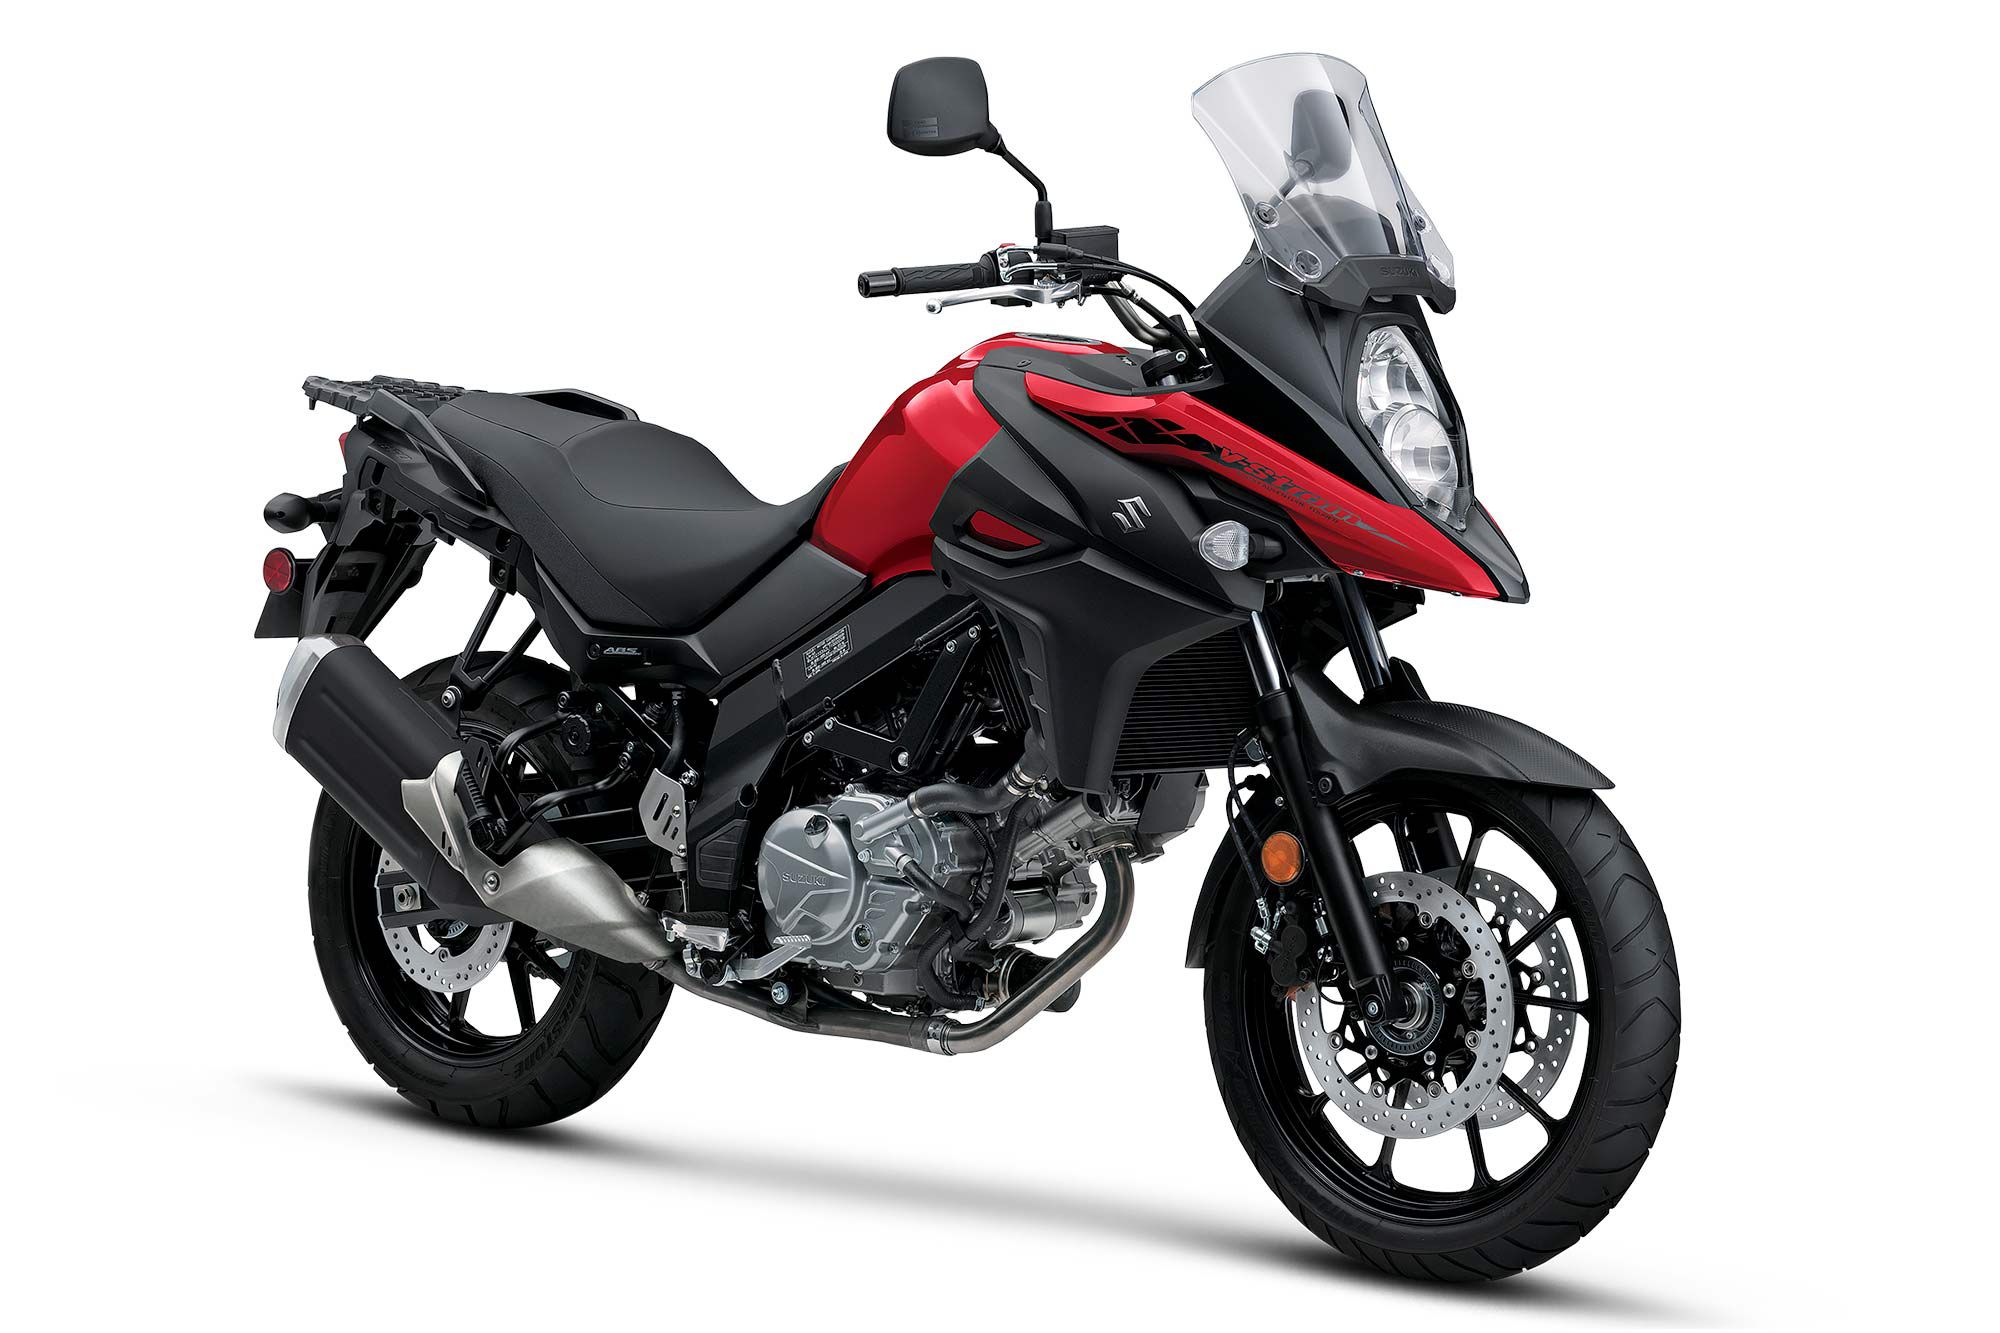 The do-it-all V-Strom 650 can handle two-up riding too.